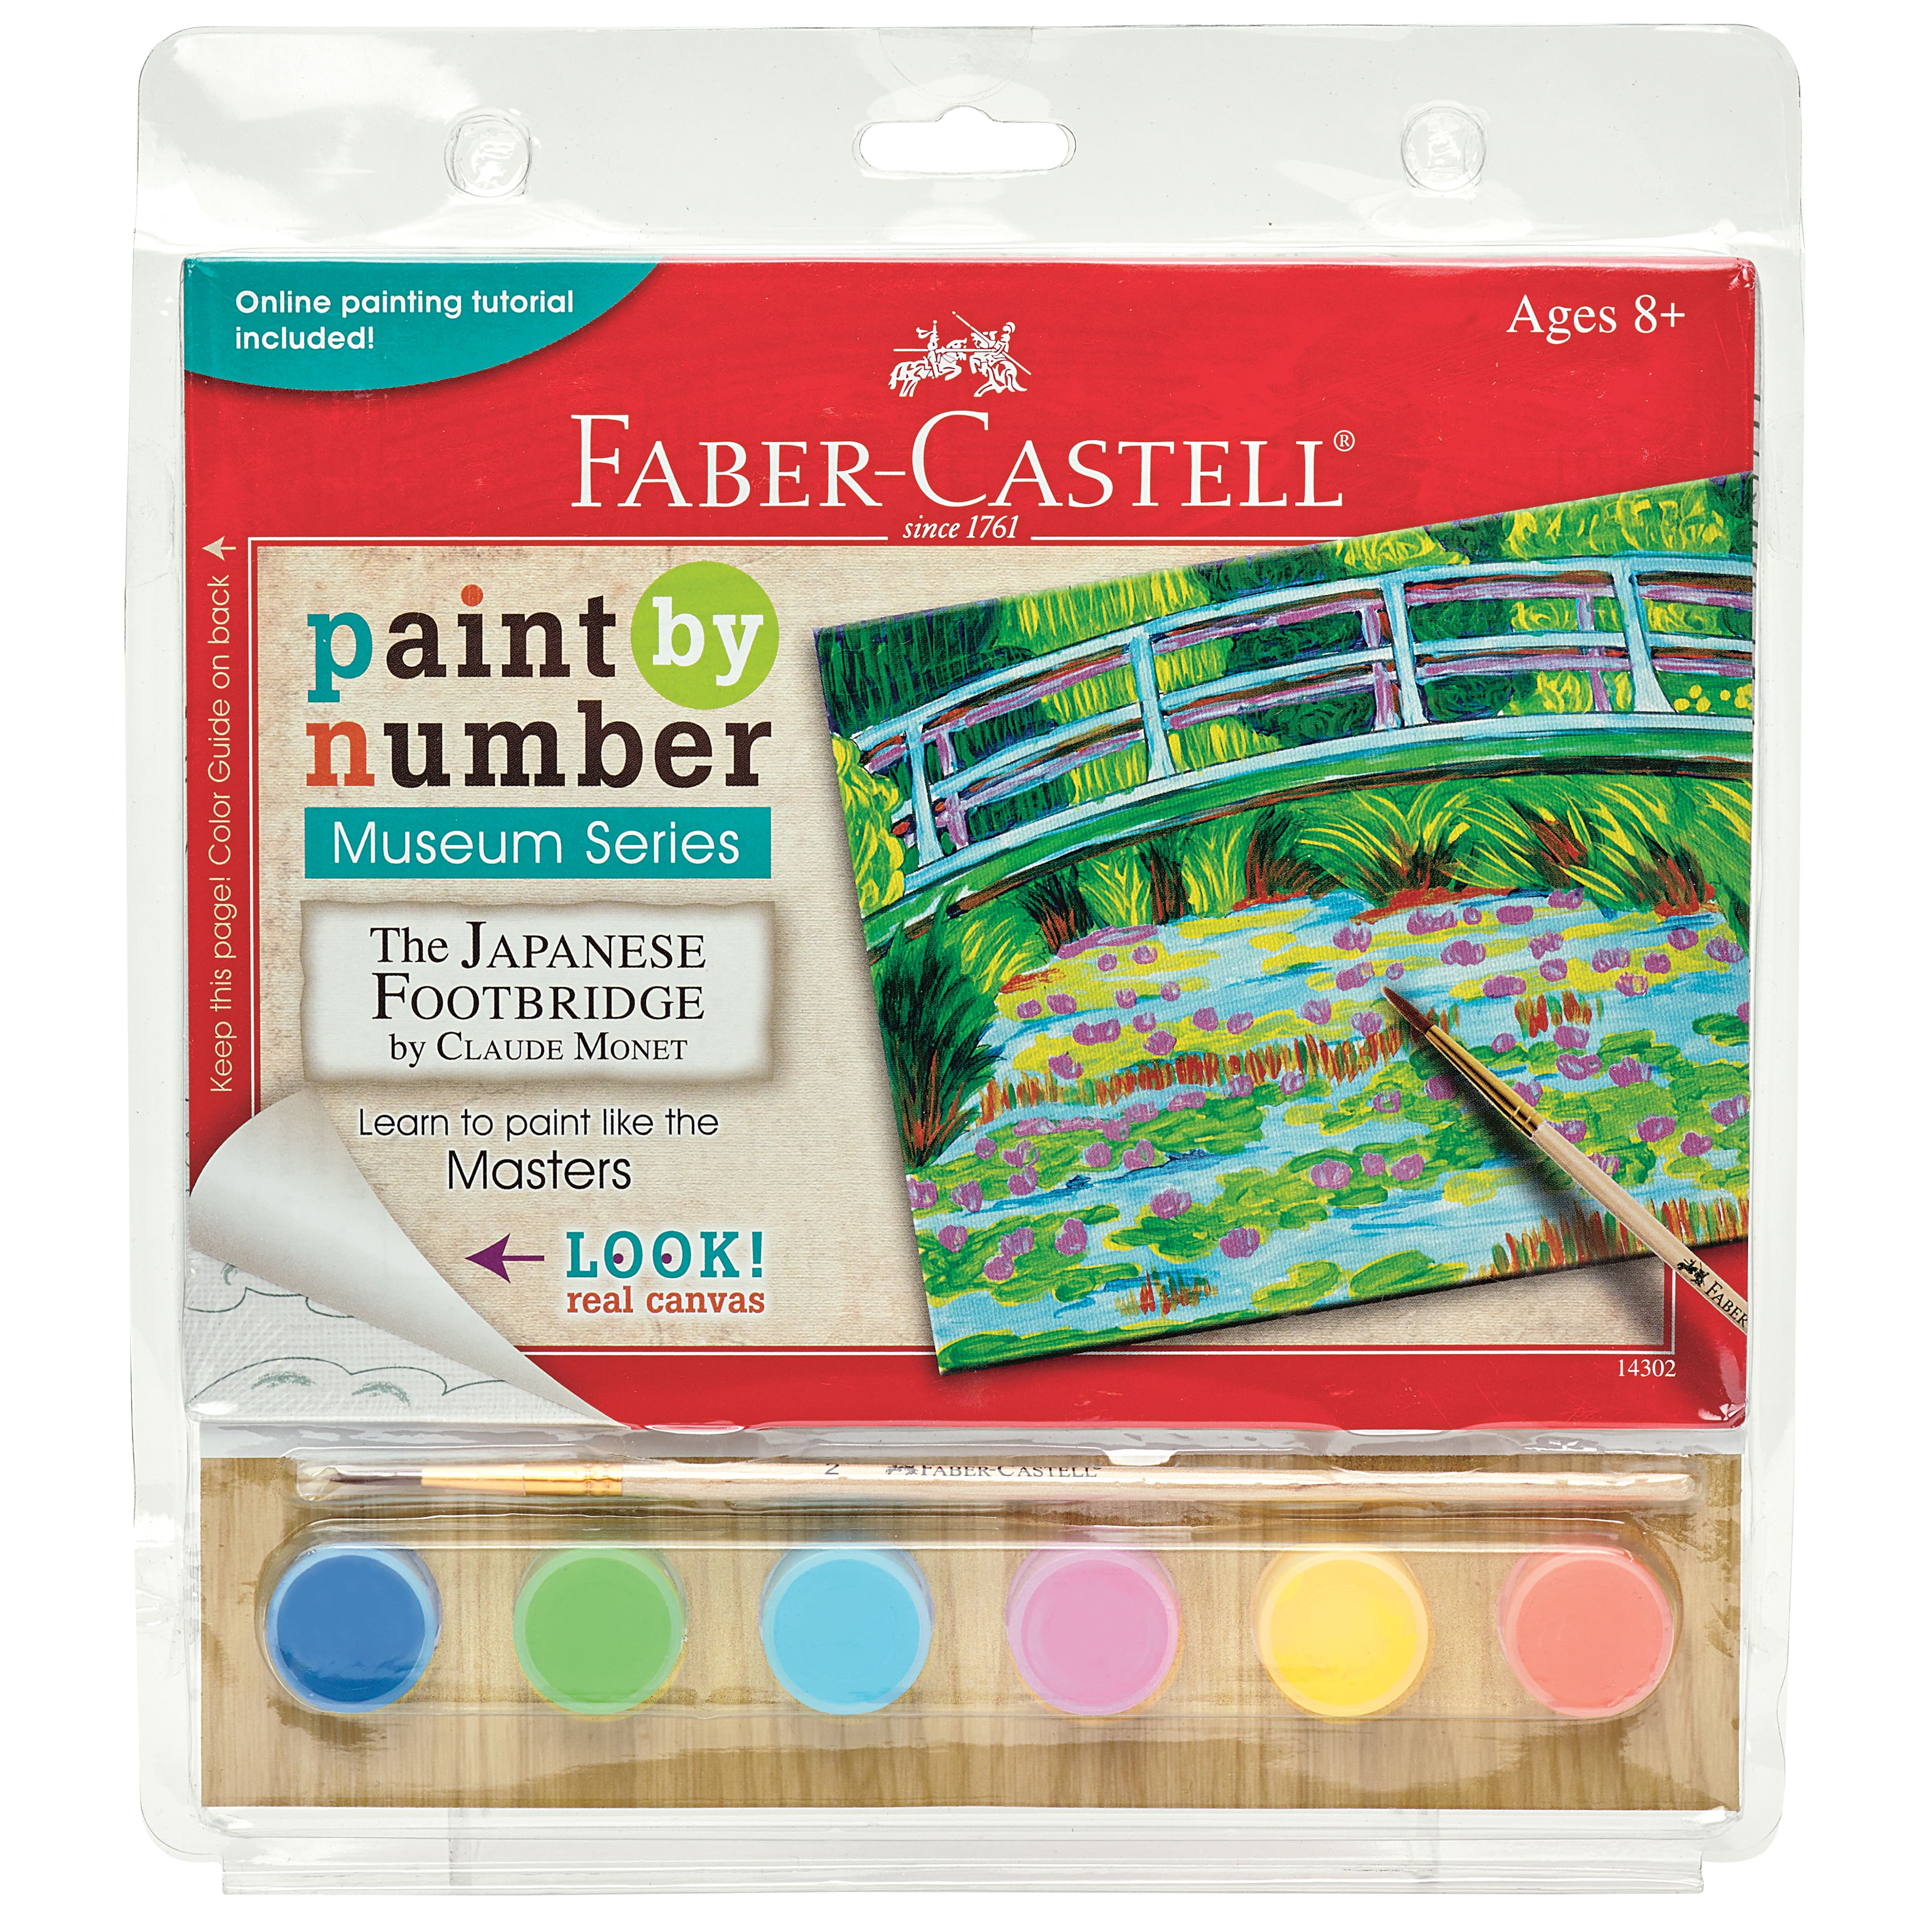 Faber-Castell Paint by Number Museum Series, The Japanese Footbridge